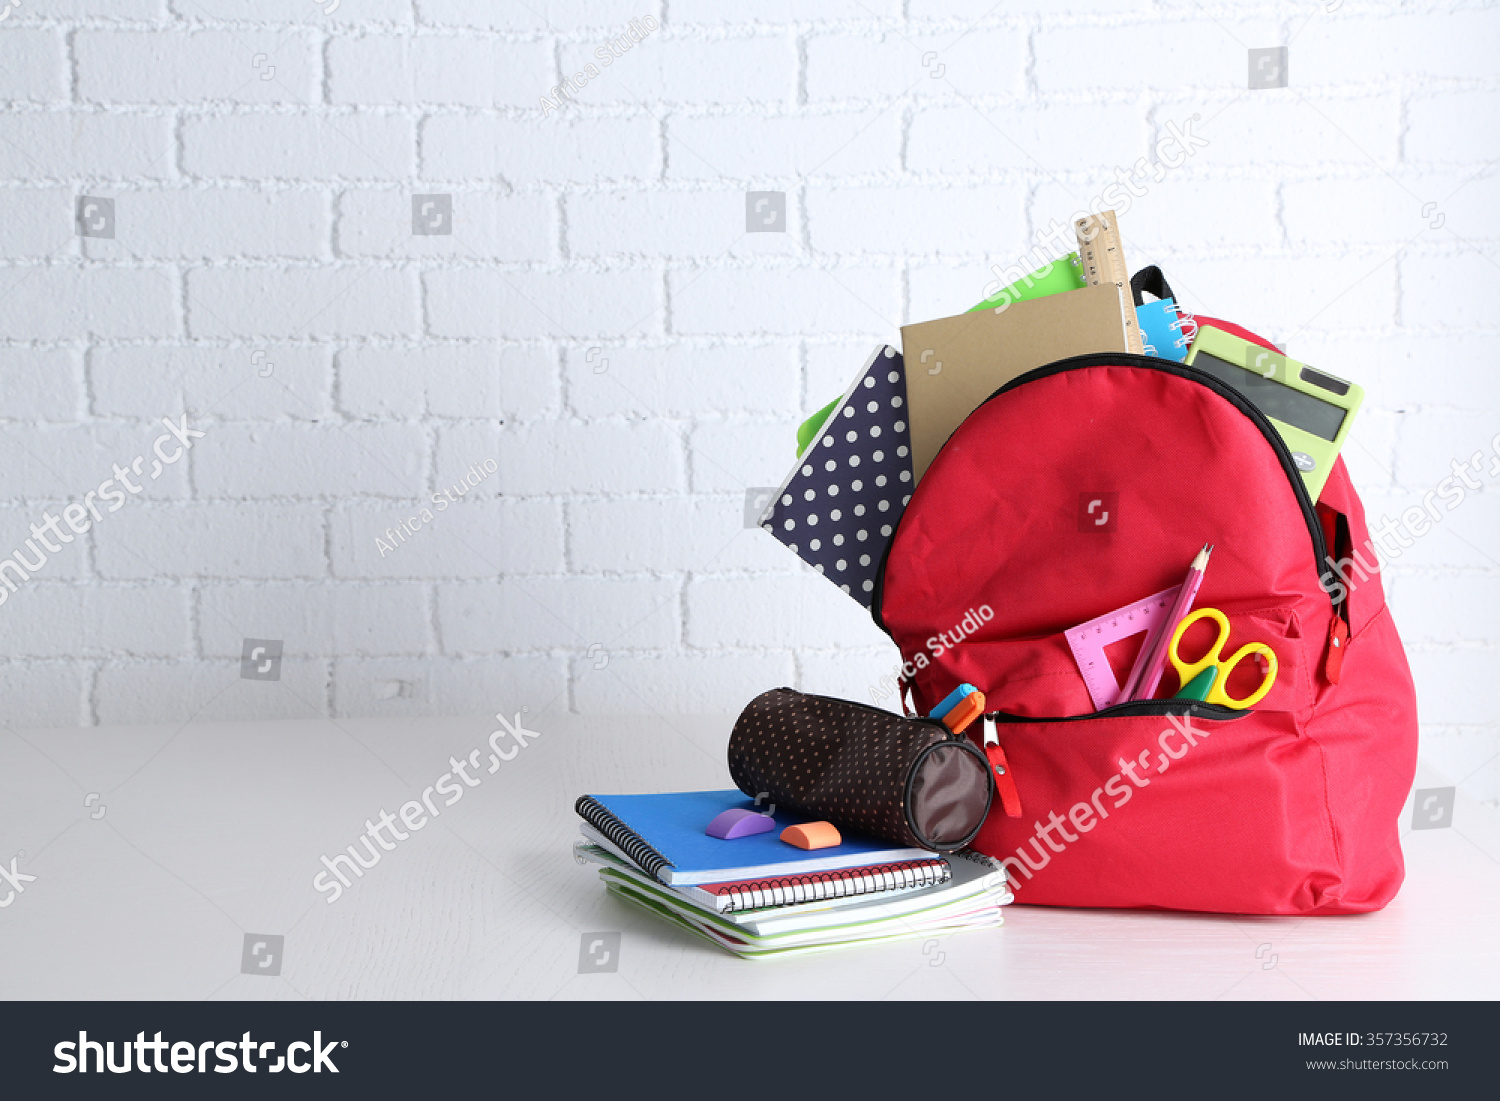 Backpack with school supplies on wooden table, on wall background #357356732